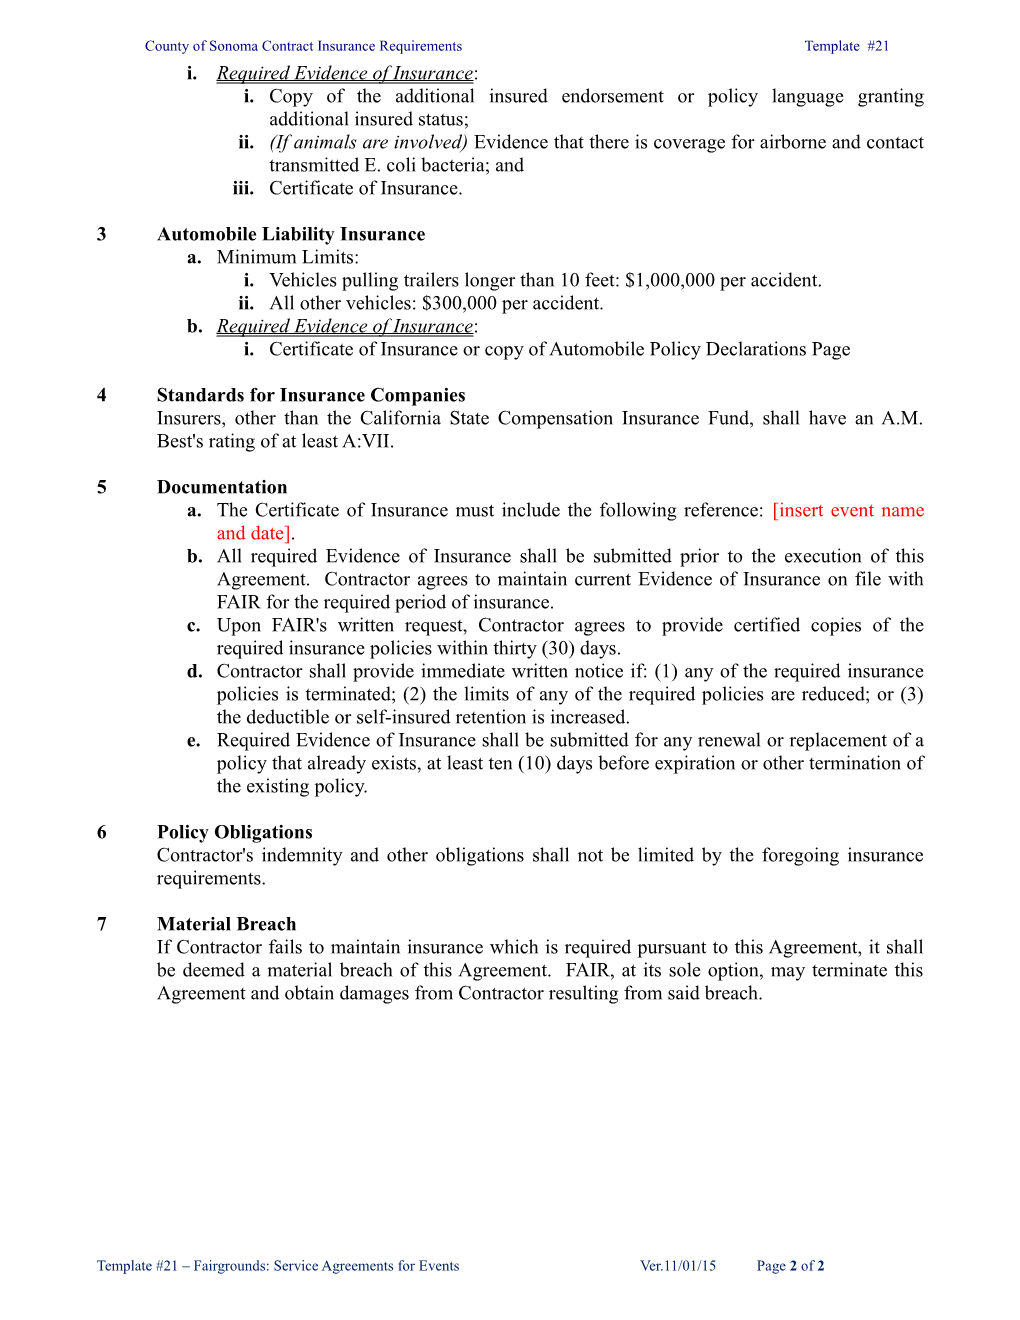 County of Sonoma Contract Insurance Requirements Template #21